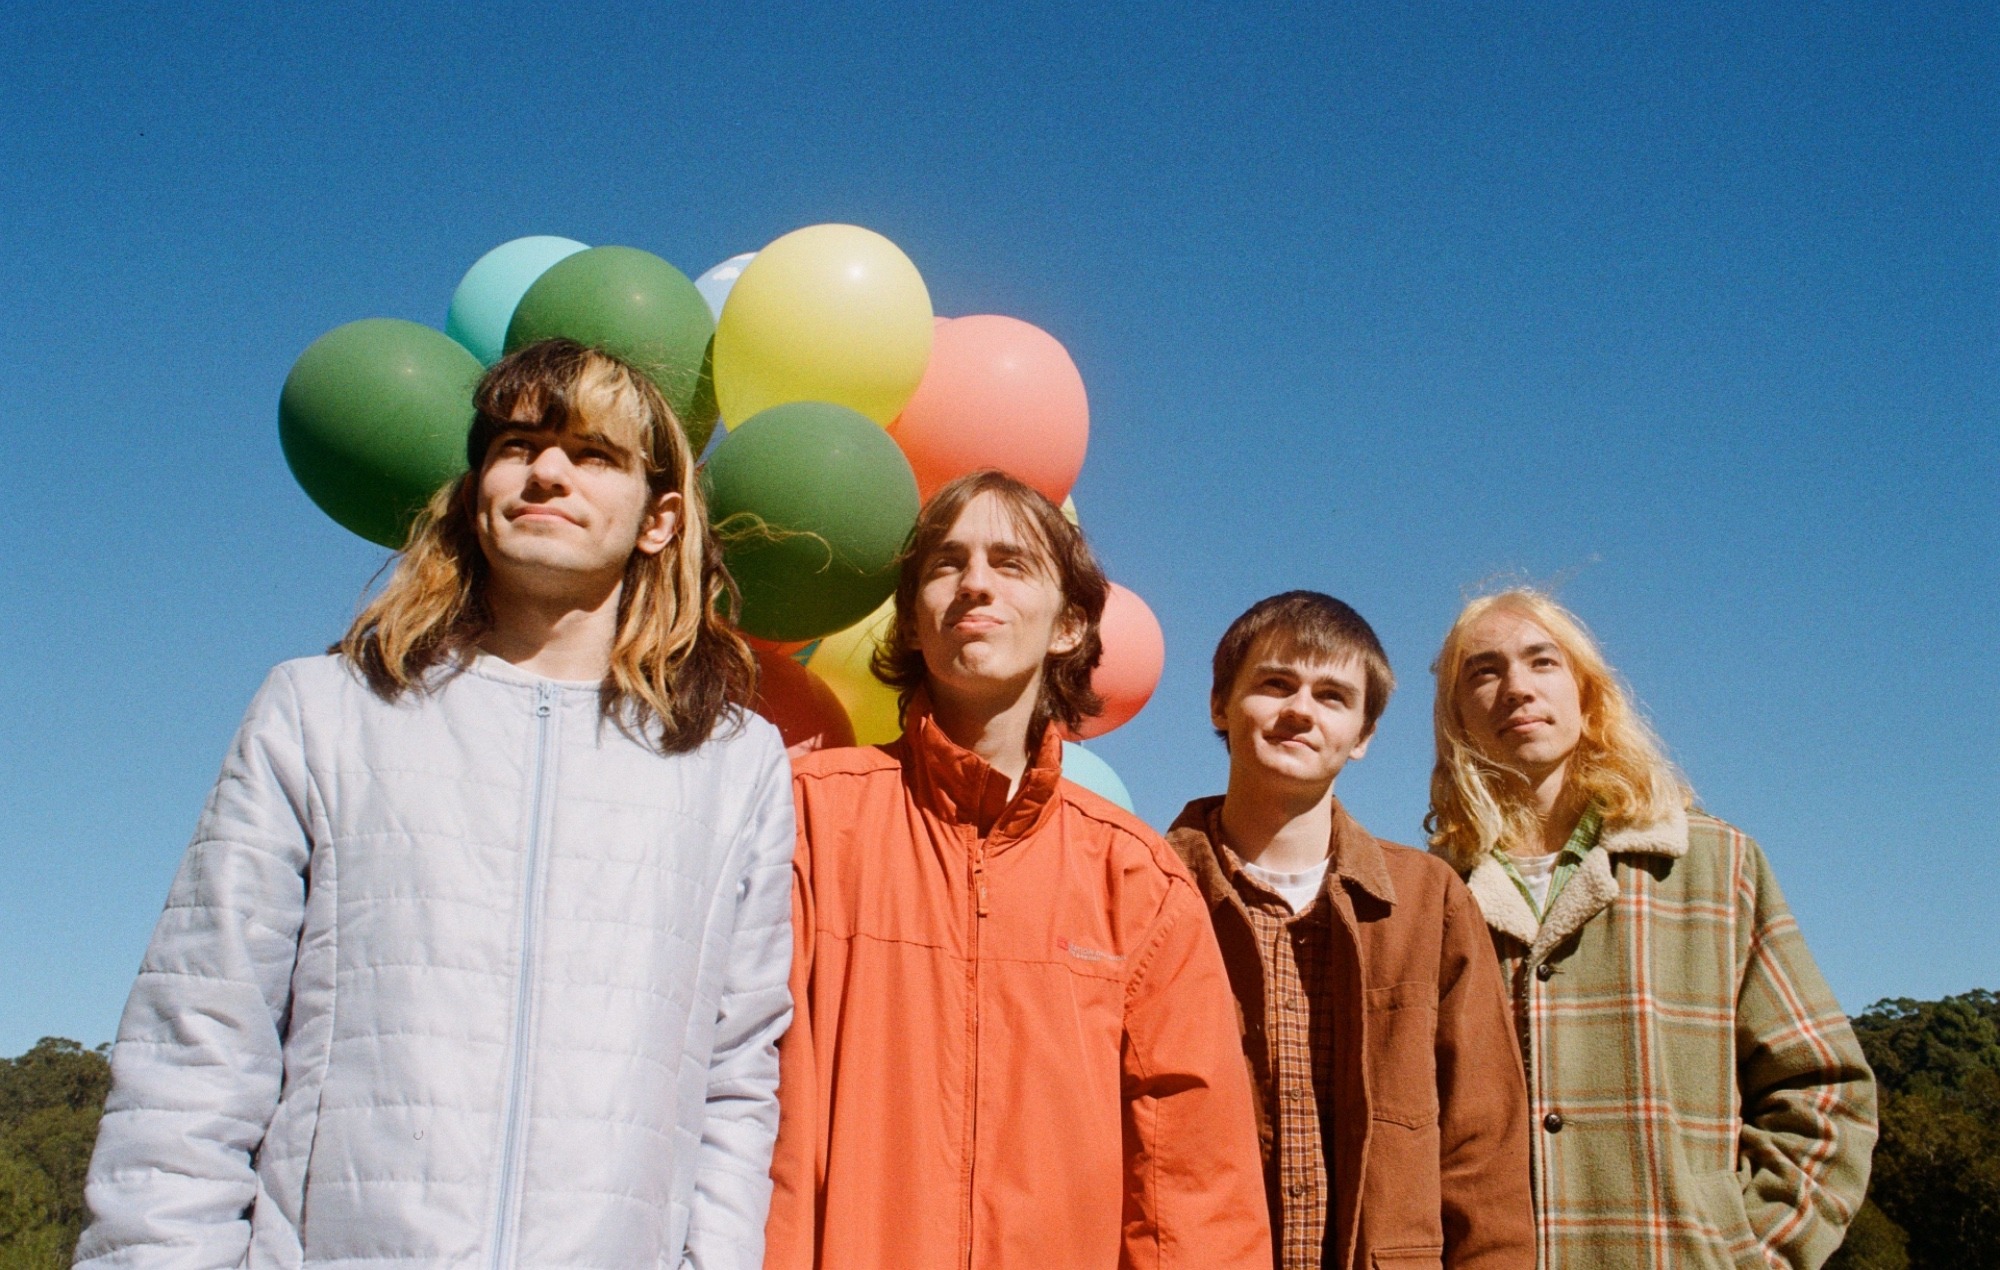 The Lazy Eyes: Aussie psych-rockers gunning to join scene’s greats